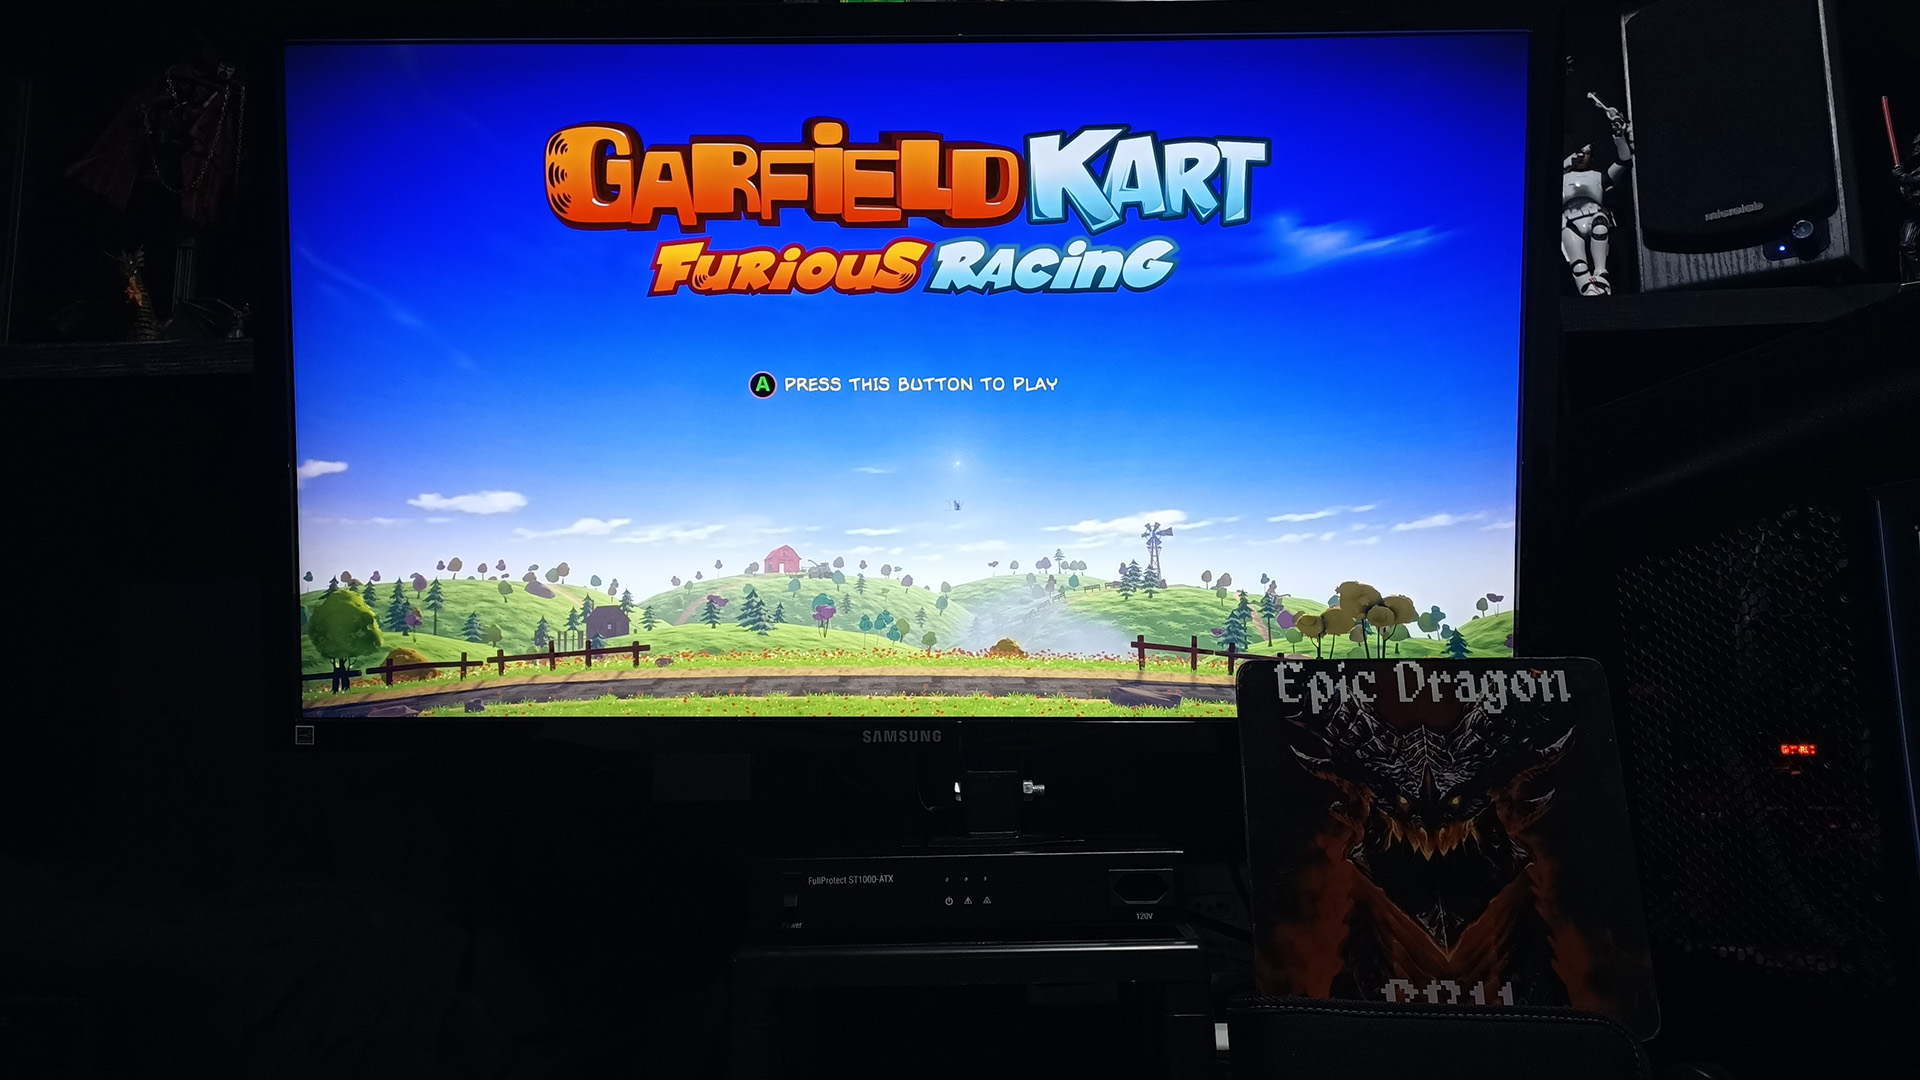 EpicDragon: Garfield Kart Furious Racing: Mysterious Temple [Time Trial: 3 Laps] (PC) 0:02:44.607 points on 2022-08-11 17:27:42